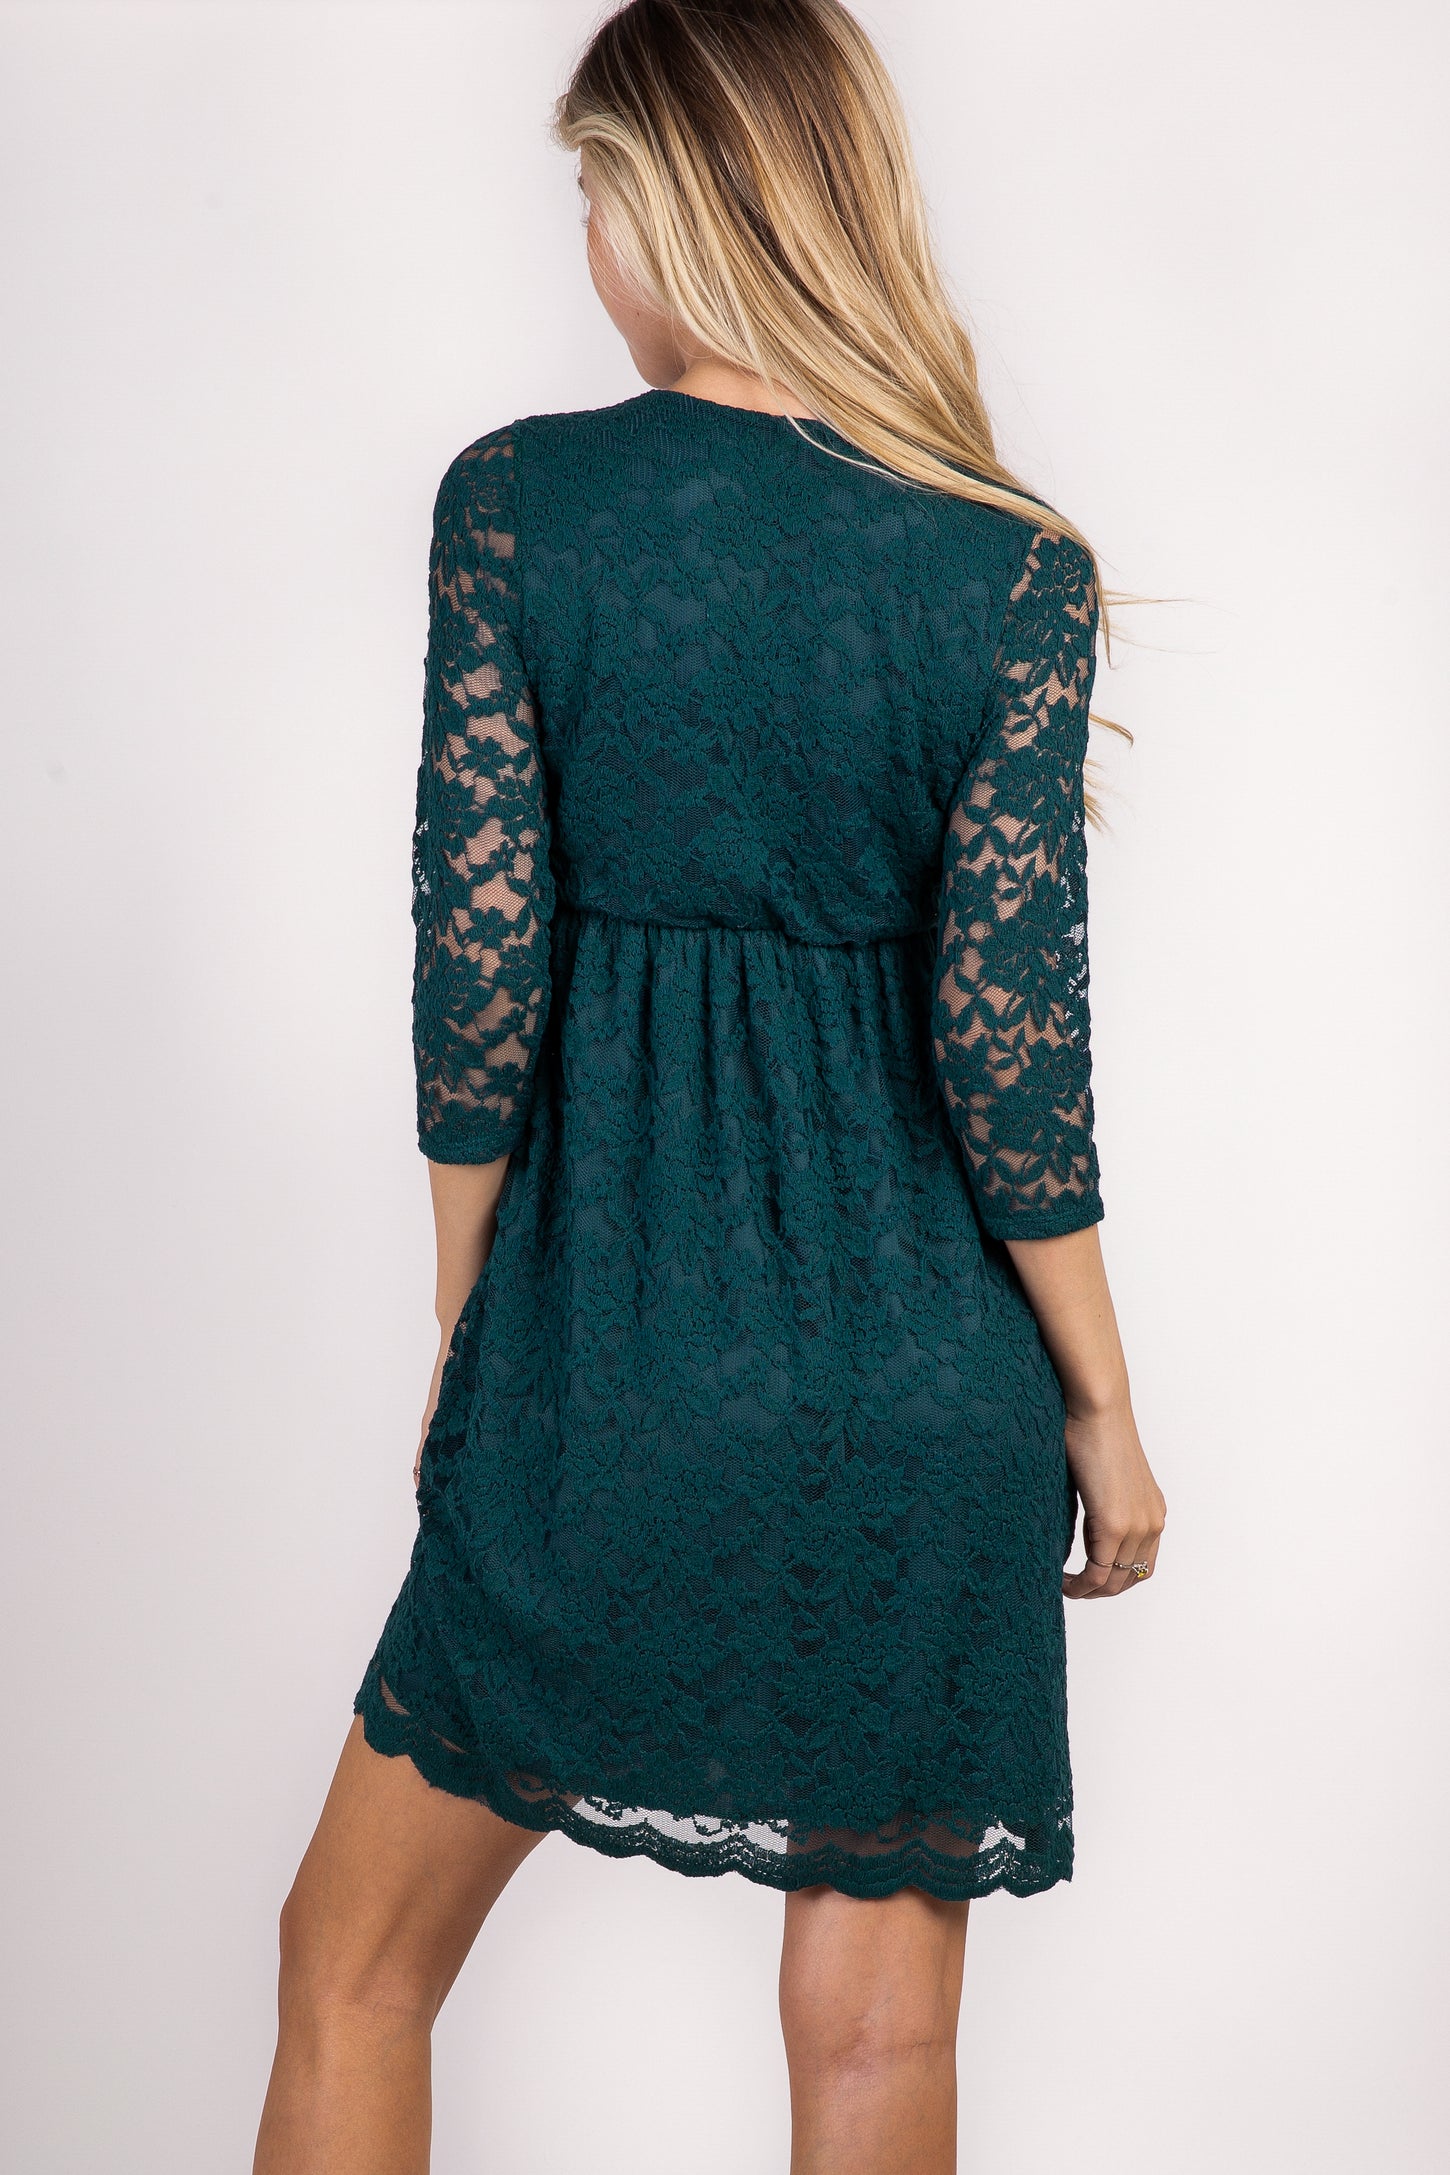 Forest Green PinkBlush Dress– Lace Overlay Wrap